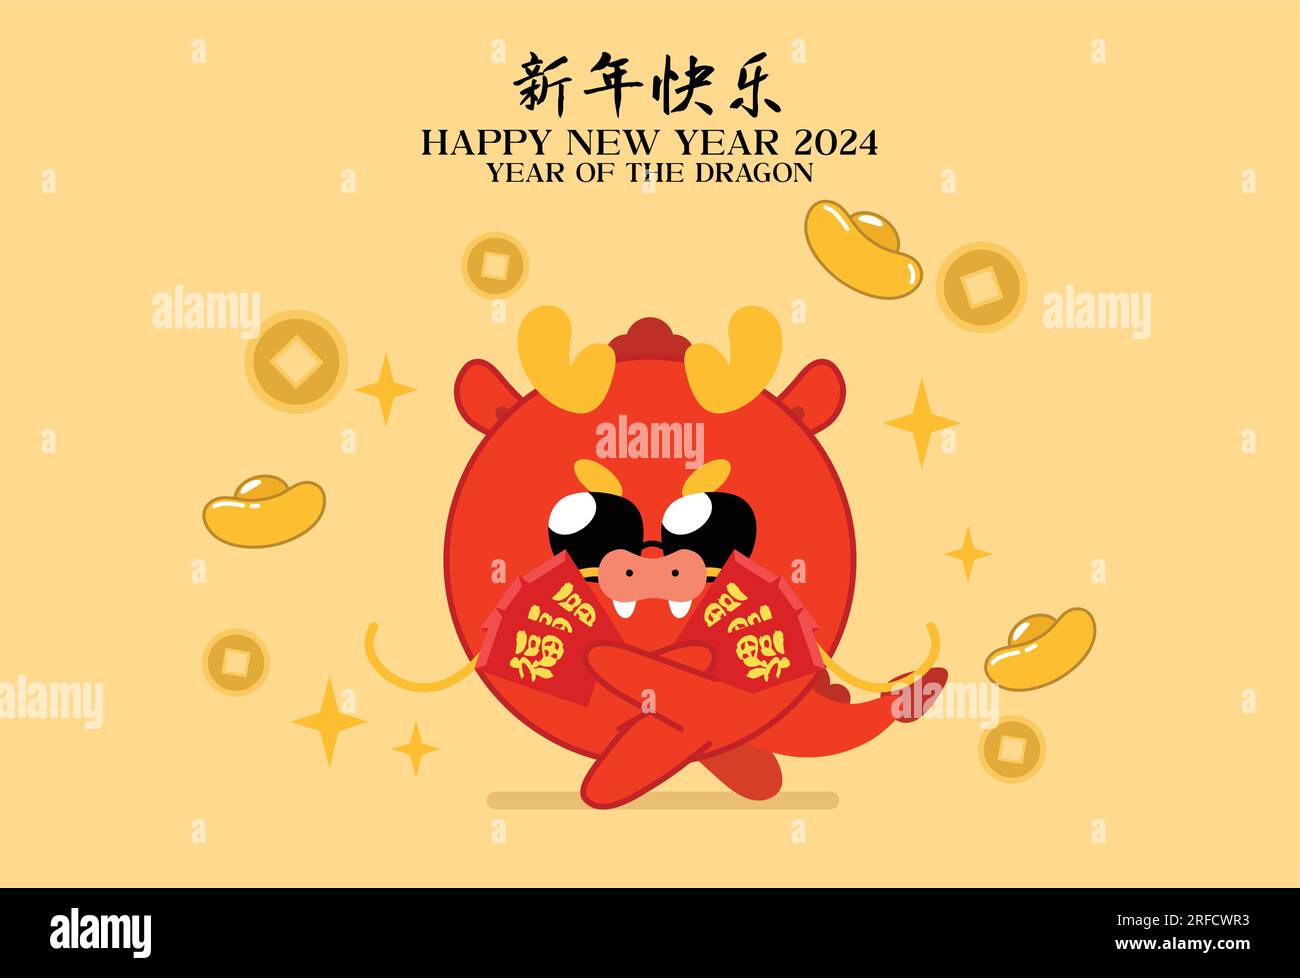 Chinese new year 2021 lucky red envelope money Vector Image